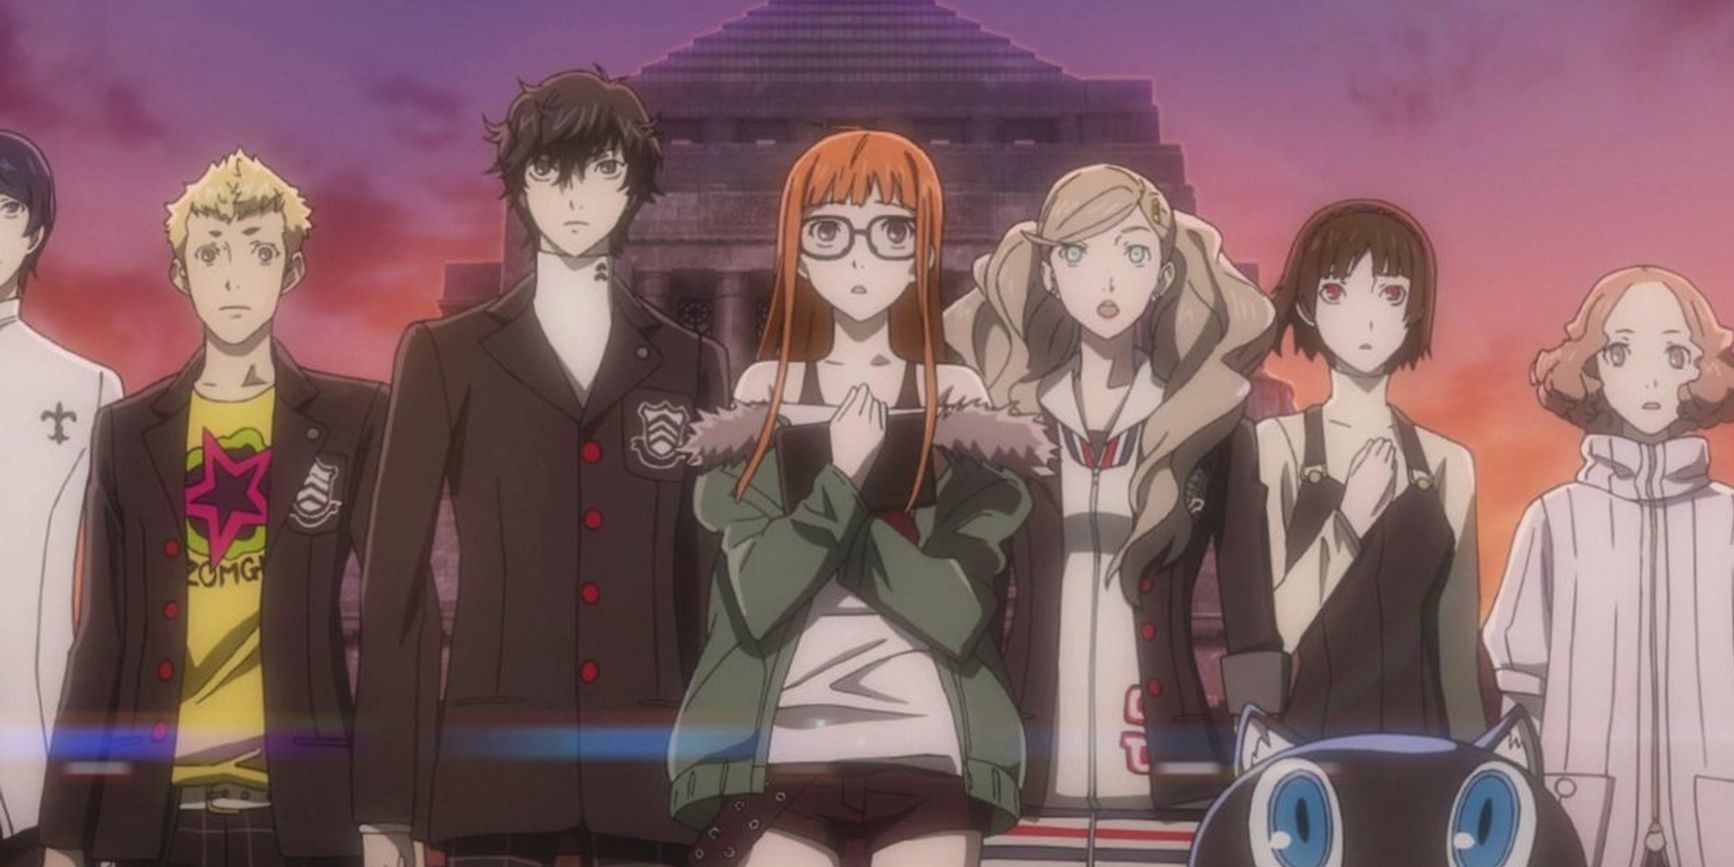 Persona 5 characters anime standing together looking towards but beyond camera